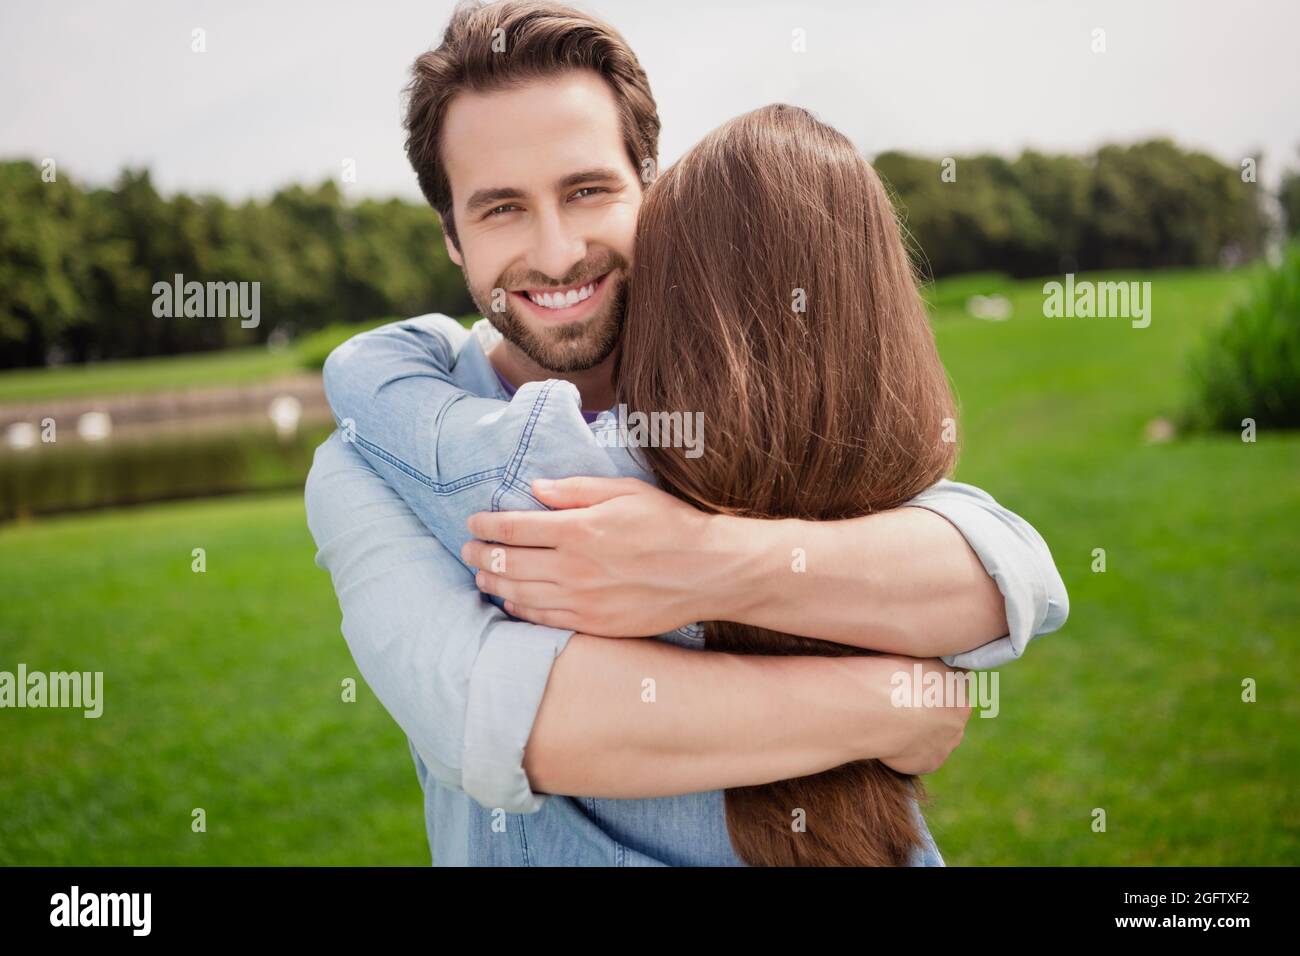 Photo of positive lovely cute beautiful couple hug embrace relaxing outdoors husband cuddle wife romantic date Stock Photo picture